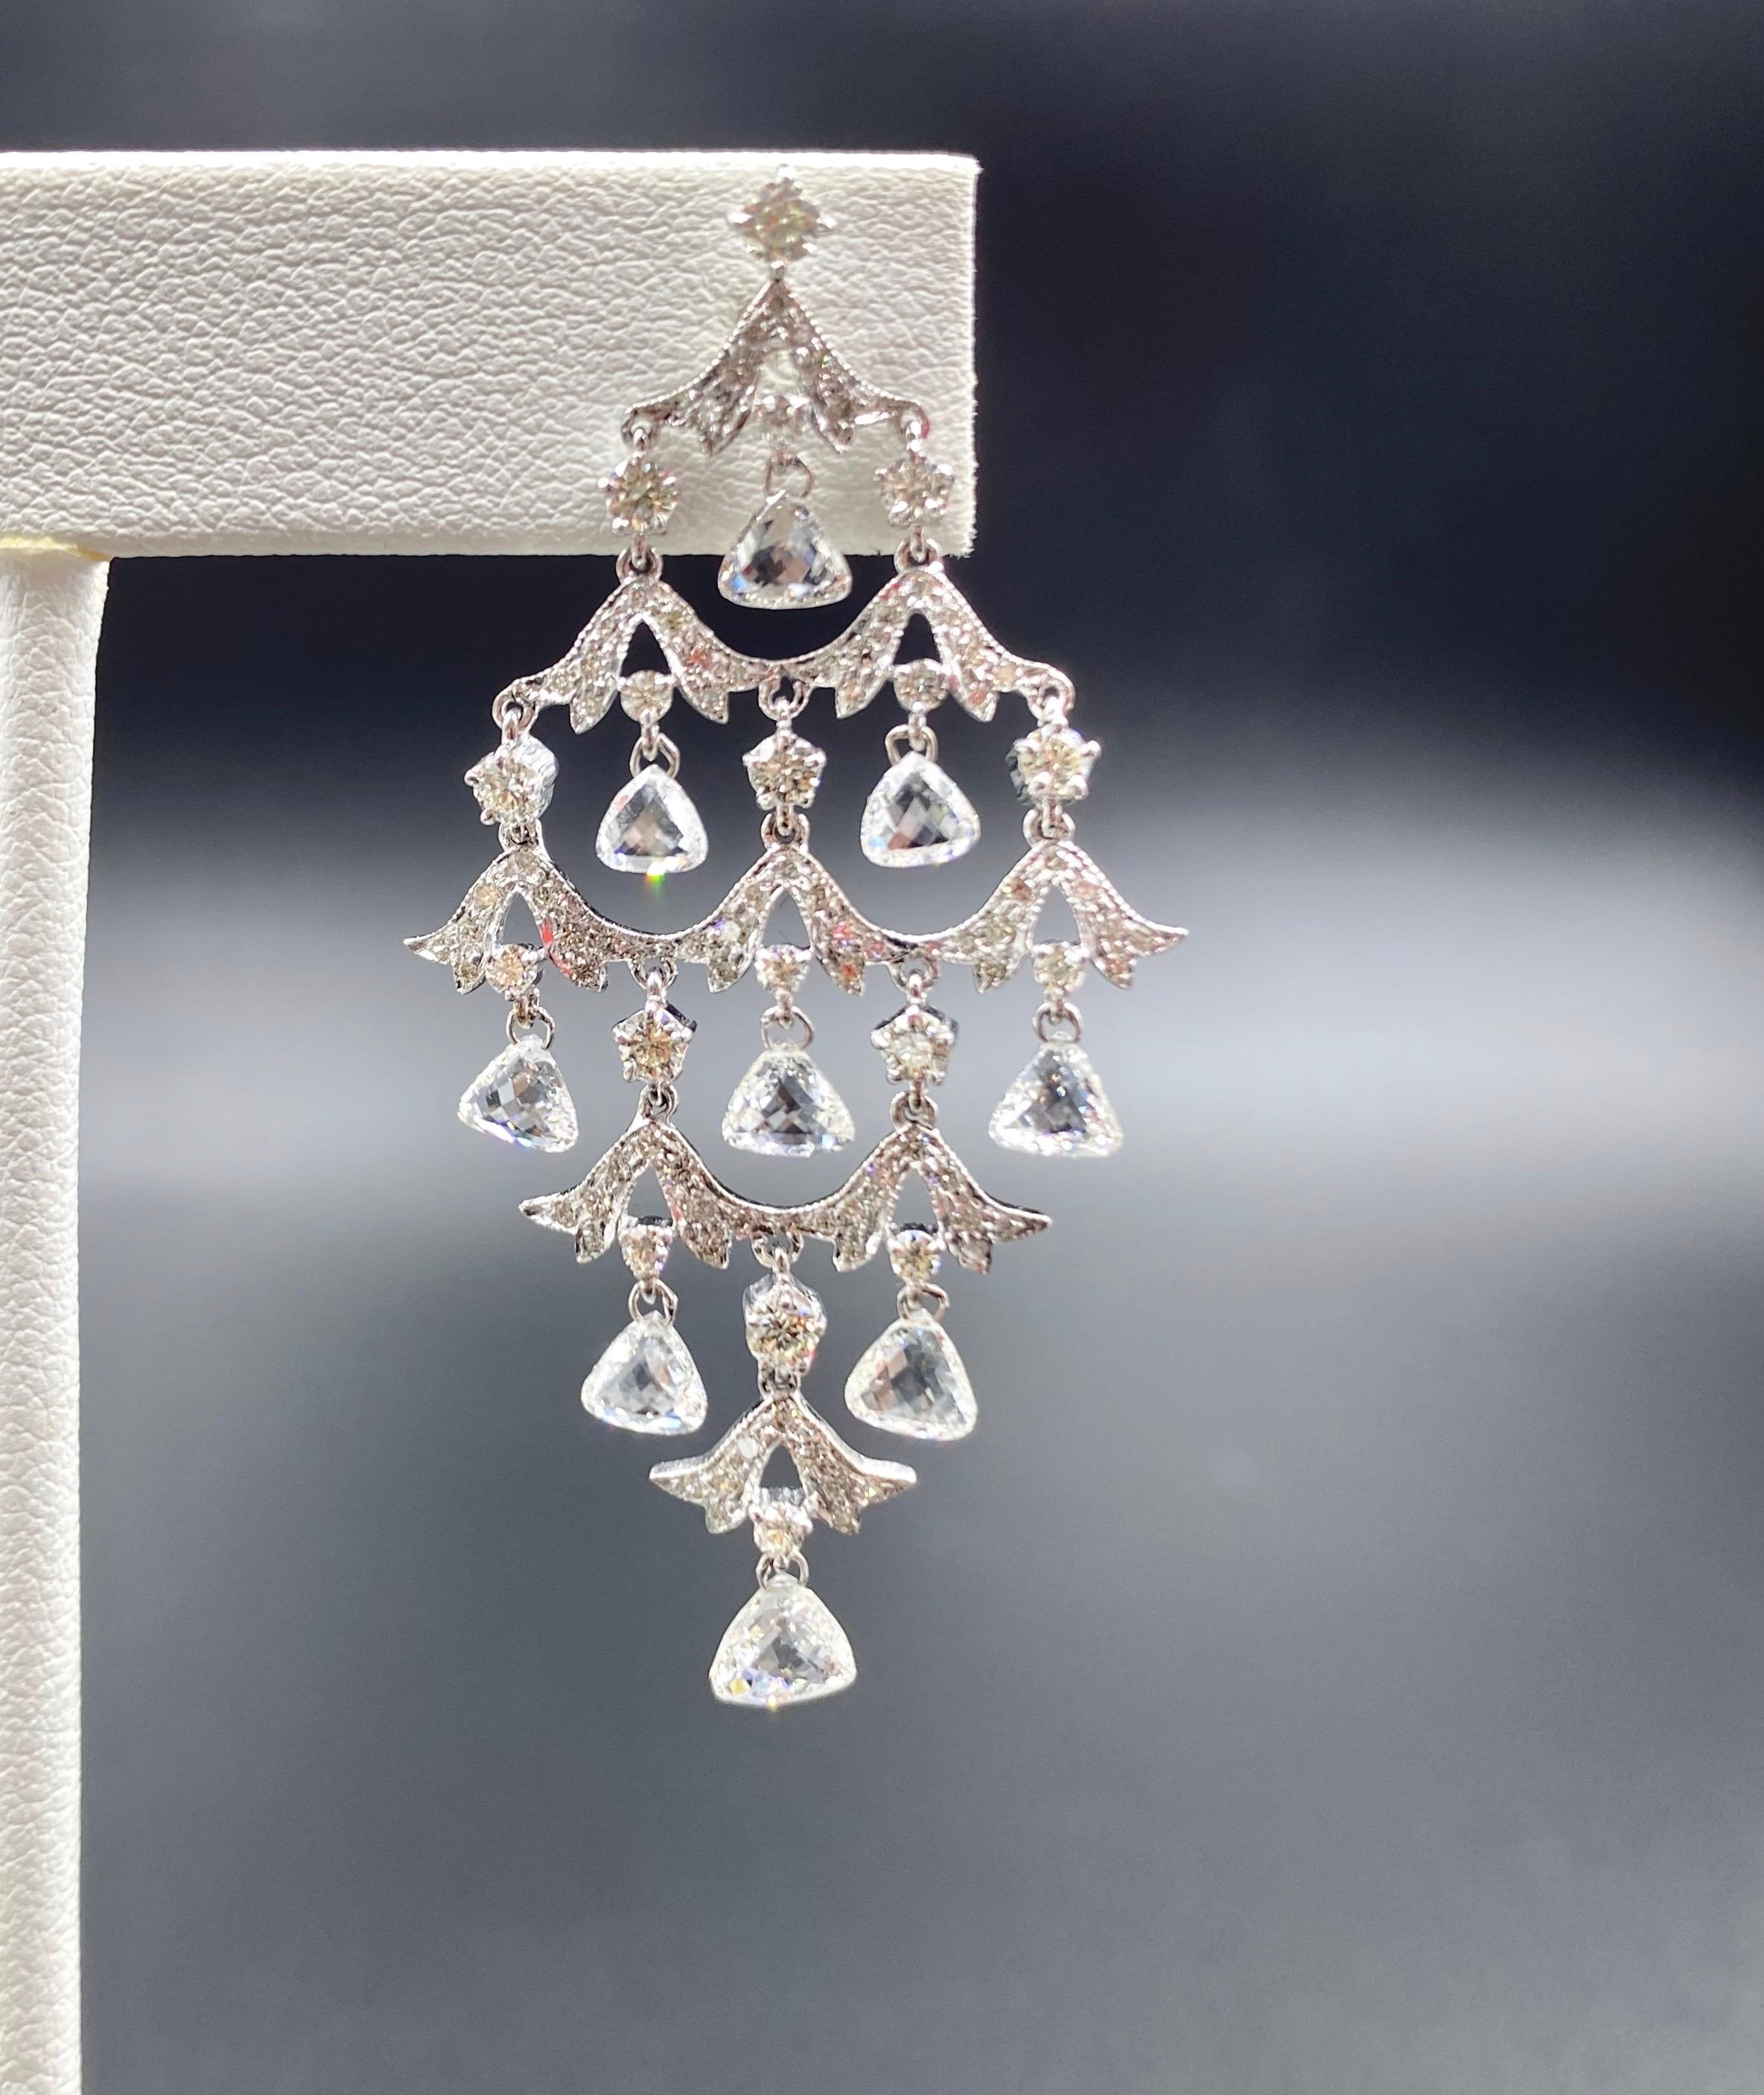 The Rose Chandelier Earrings feature 4.90 carats of triangular rose cut diamonds set in 18K white gold. A truly inspiring creation, these earrings are unbelievably light, made using minimum metal and create an illusion of floating diamonds.

Diamond